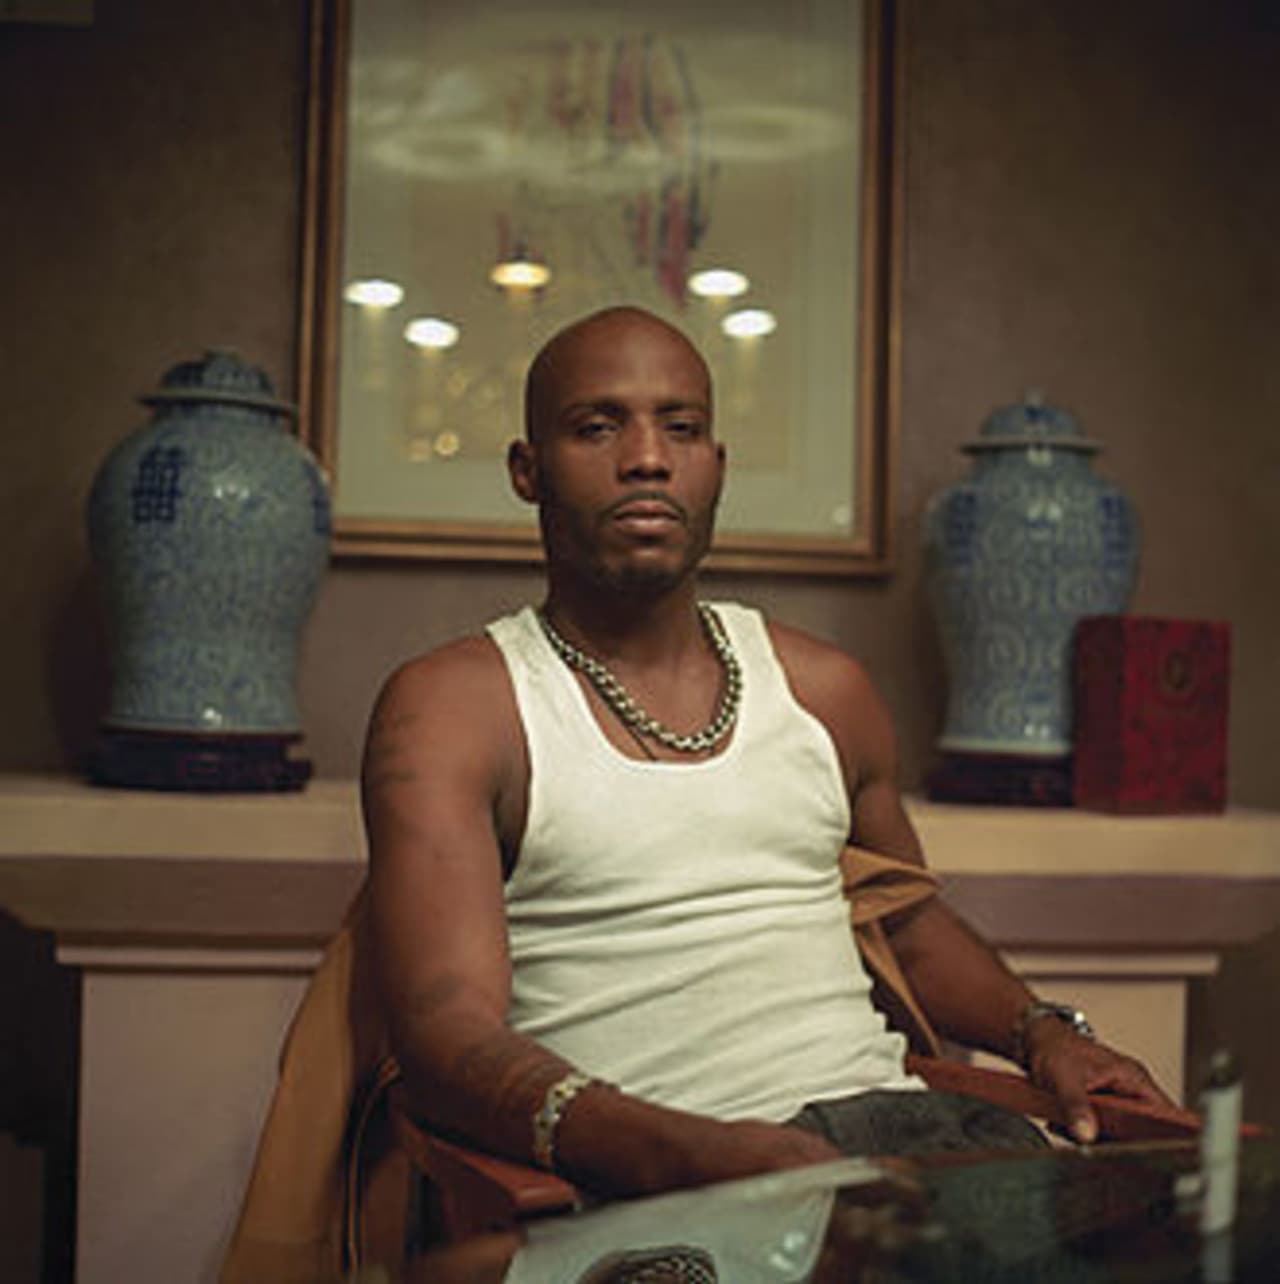 Mount Vernon native rapper Earl Simmons, also known as DMX.